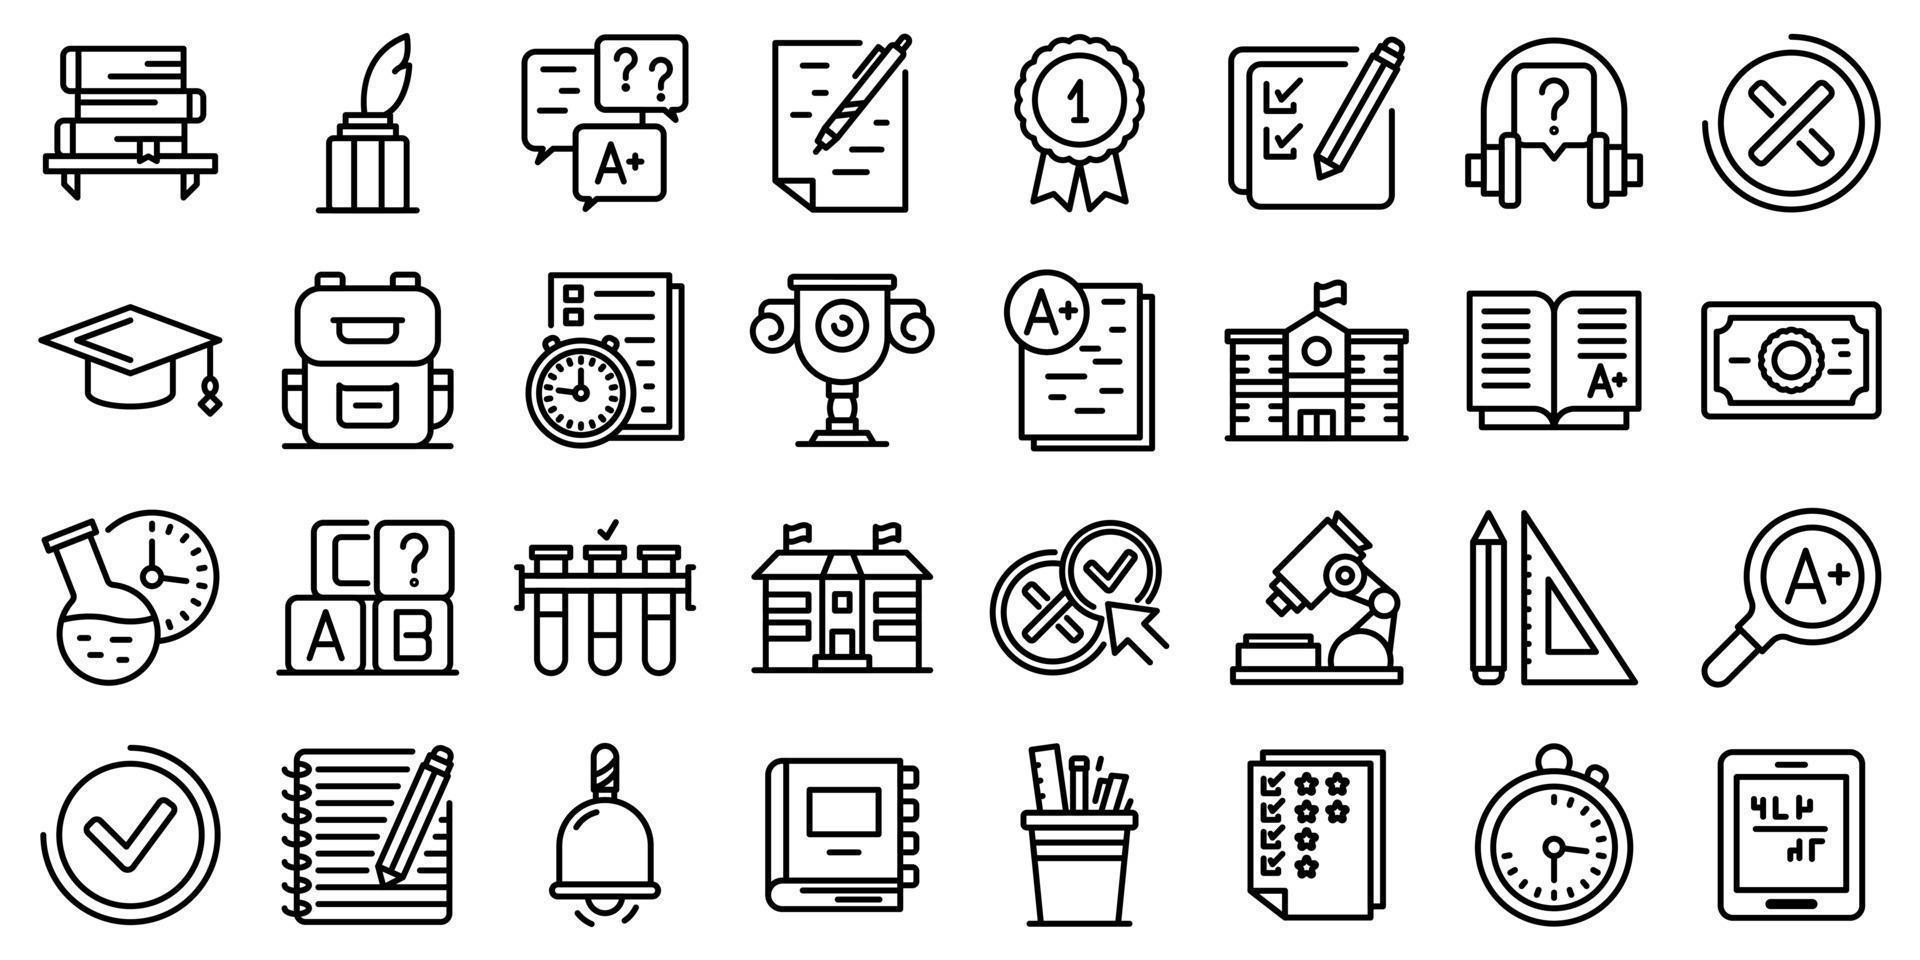 School test icons set, outline style vector